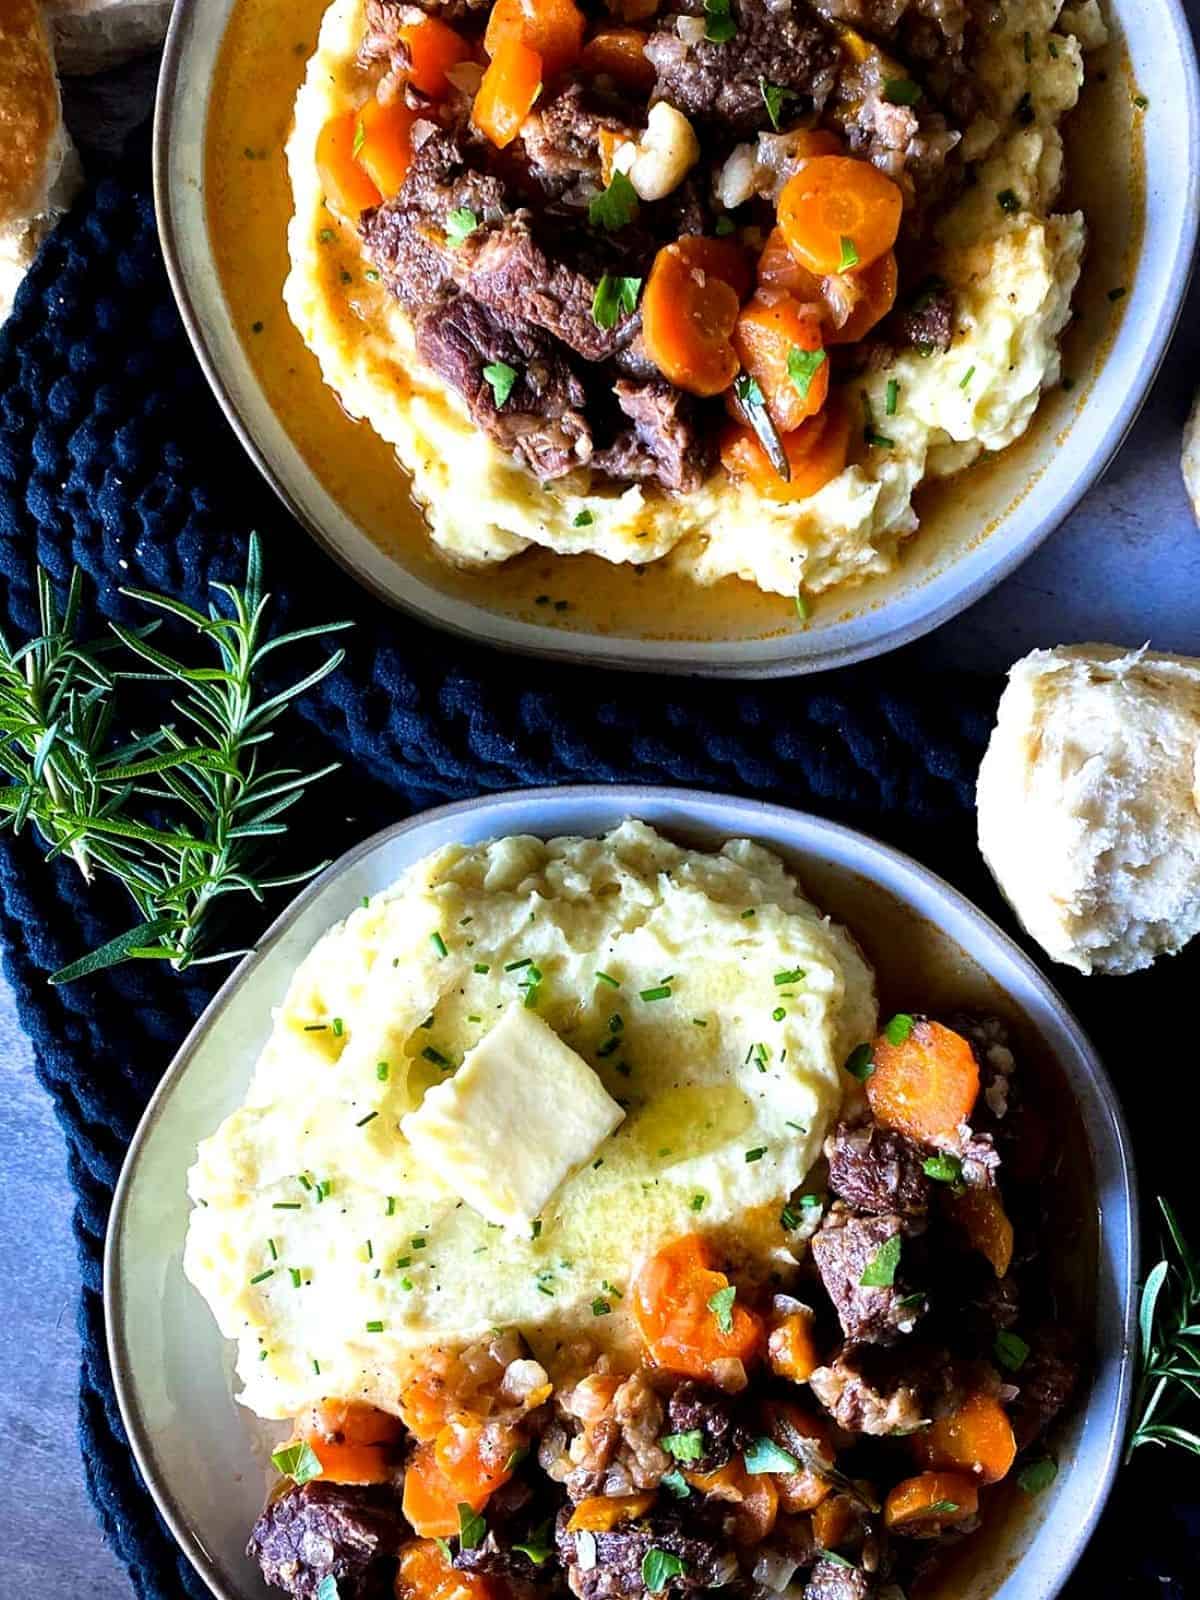 Beef short ribs served with vegetables and mashed potatoes.